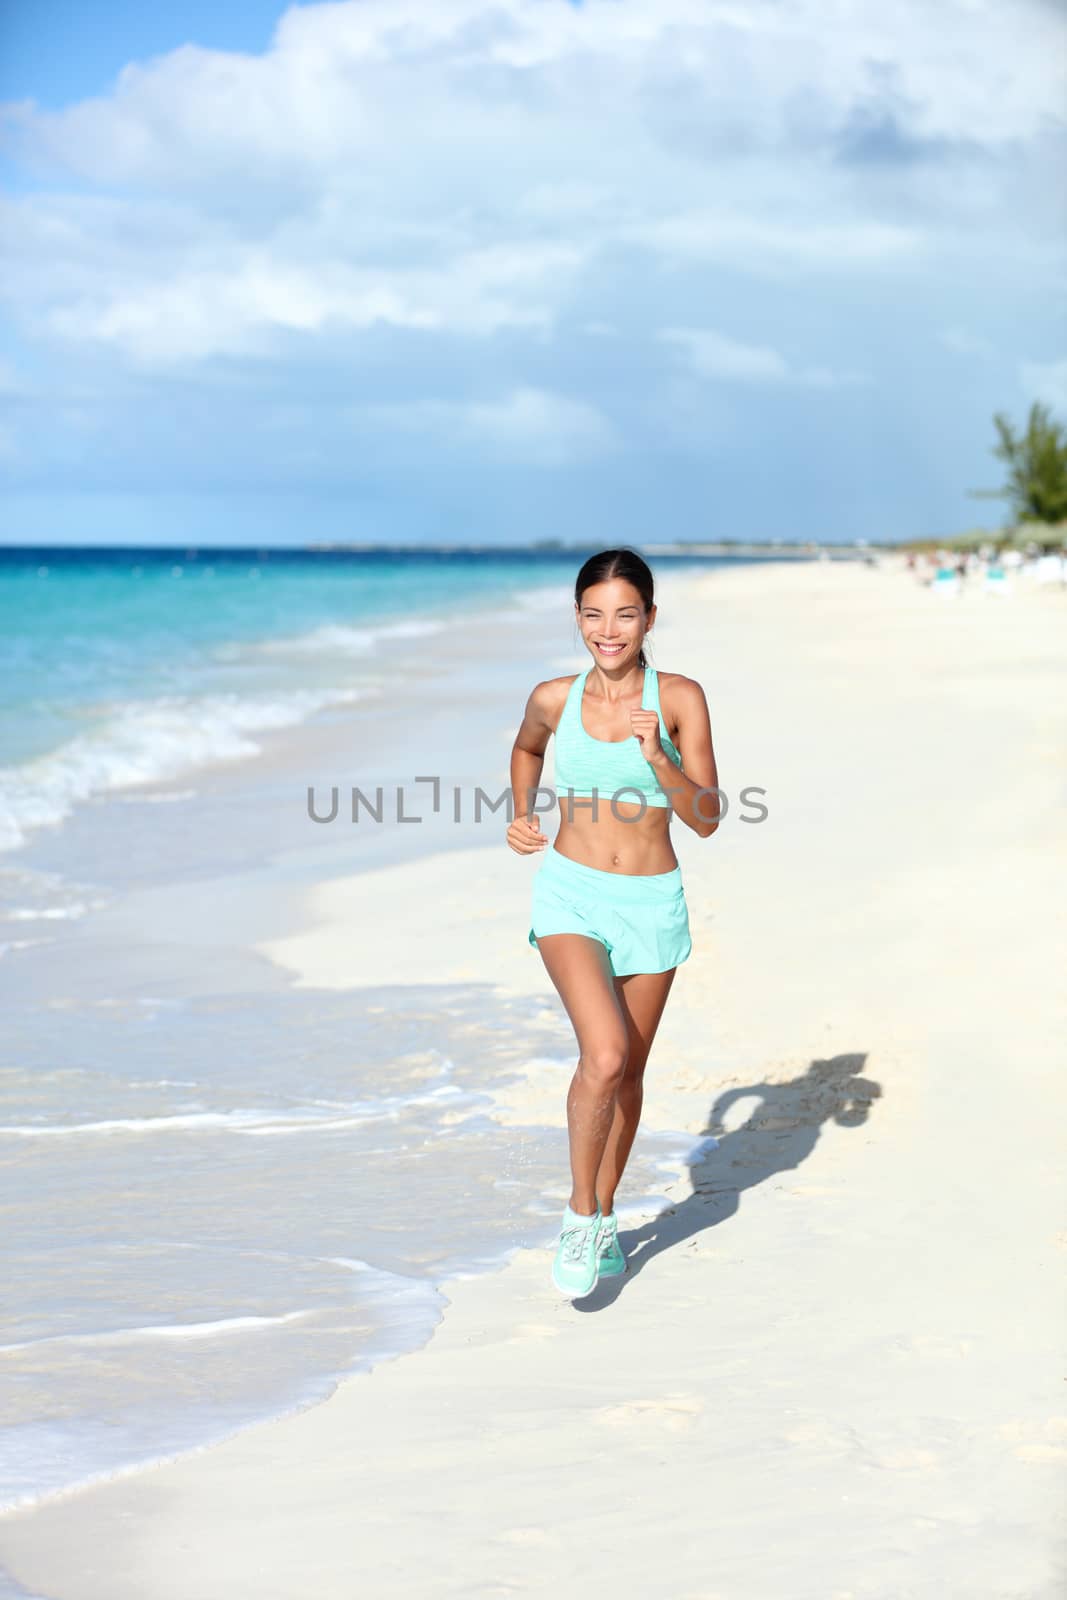 Happy jogging woman running on sunny beach living a fit and active life. Happiness and health concept on summer vacation travel beach.